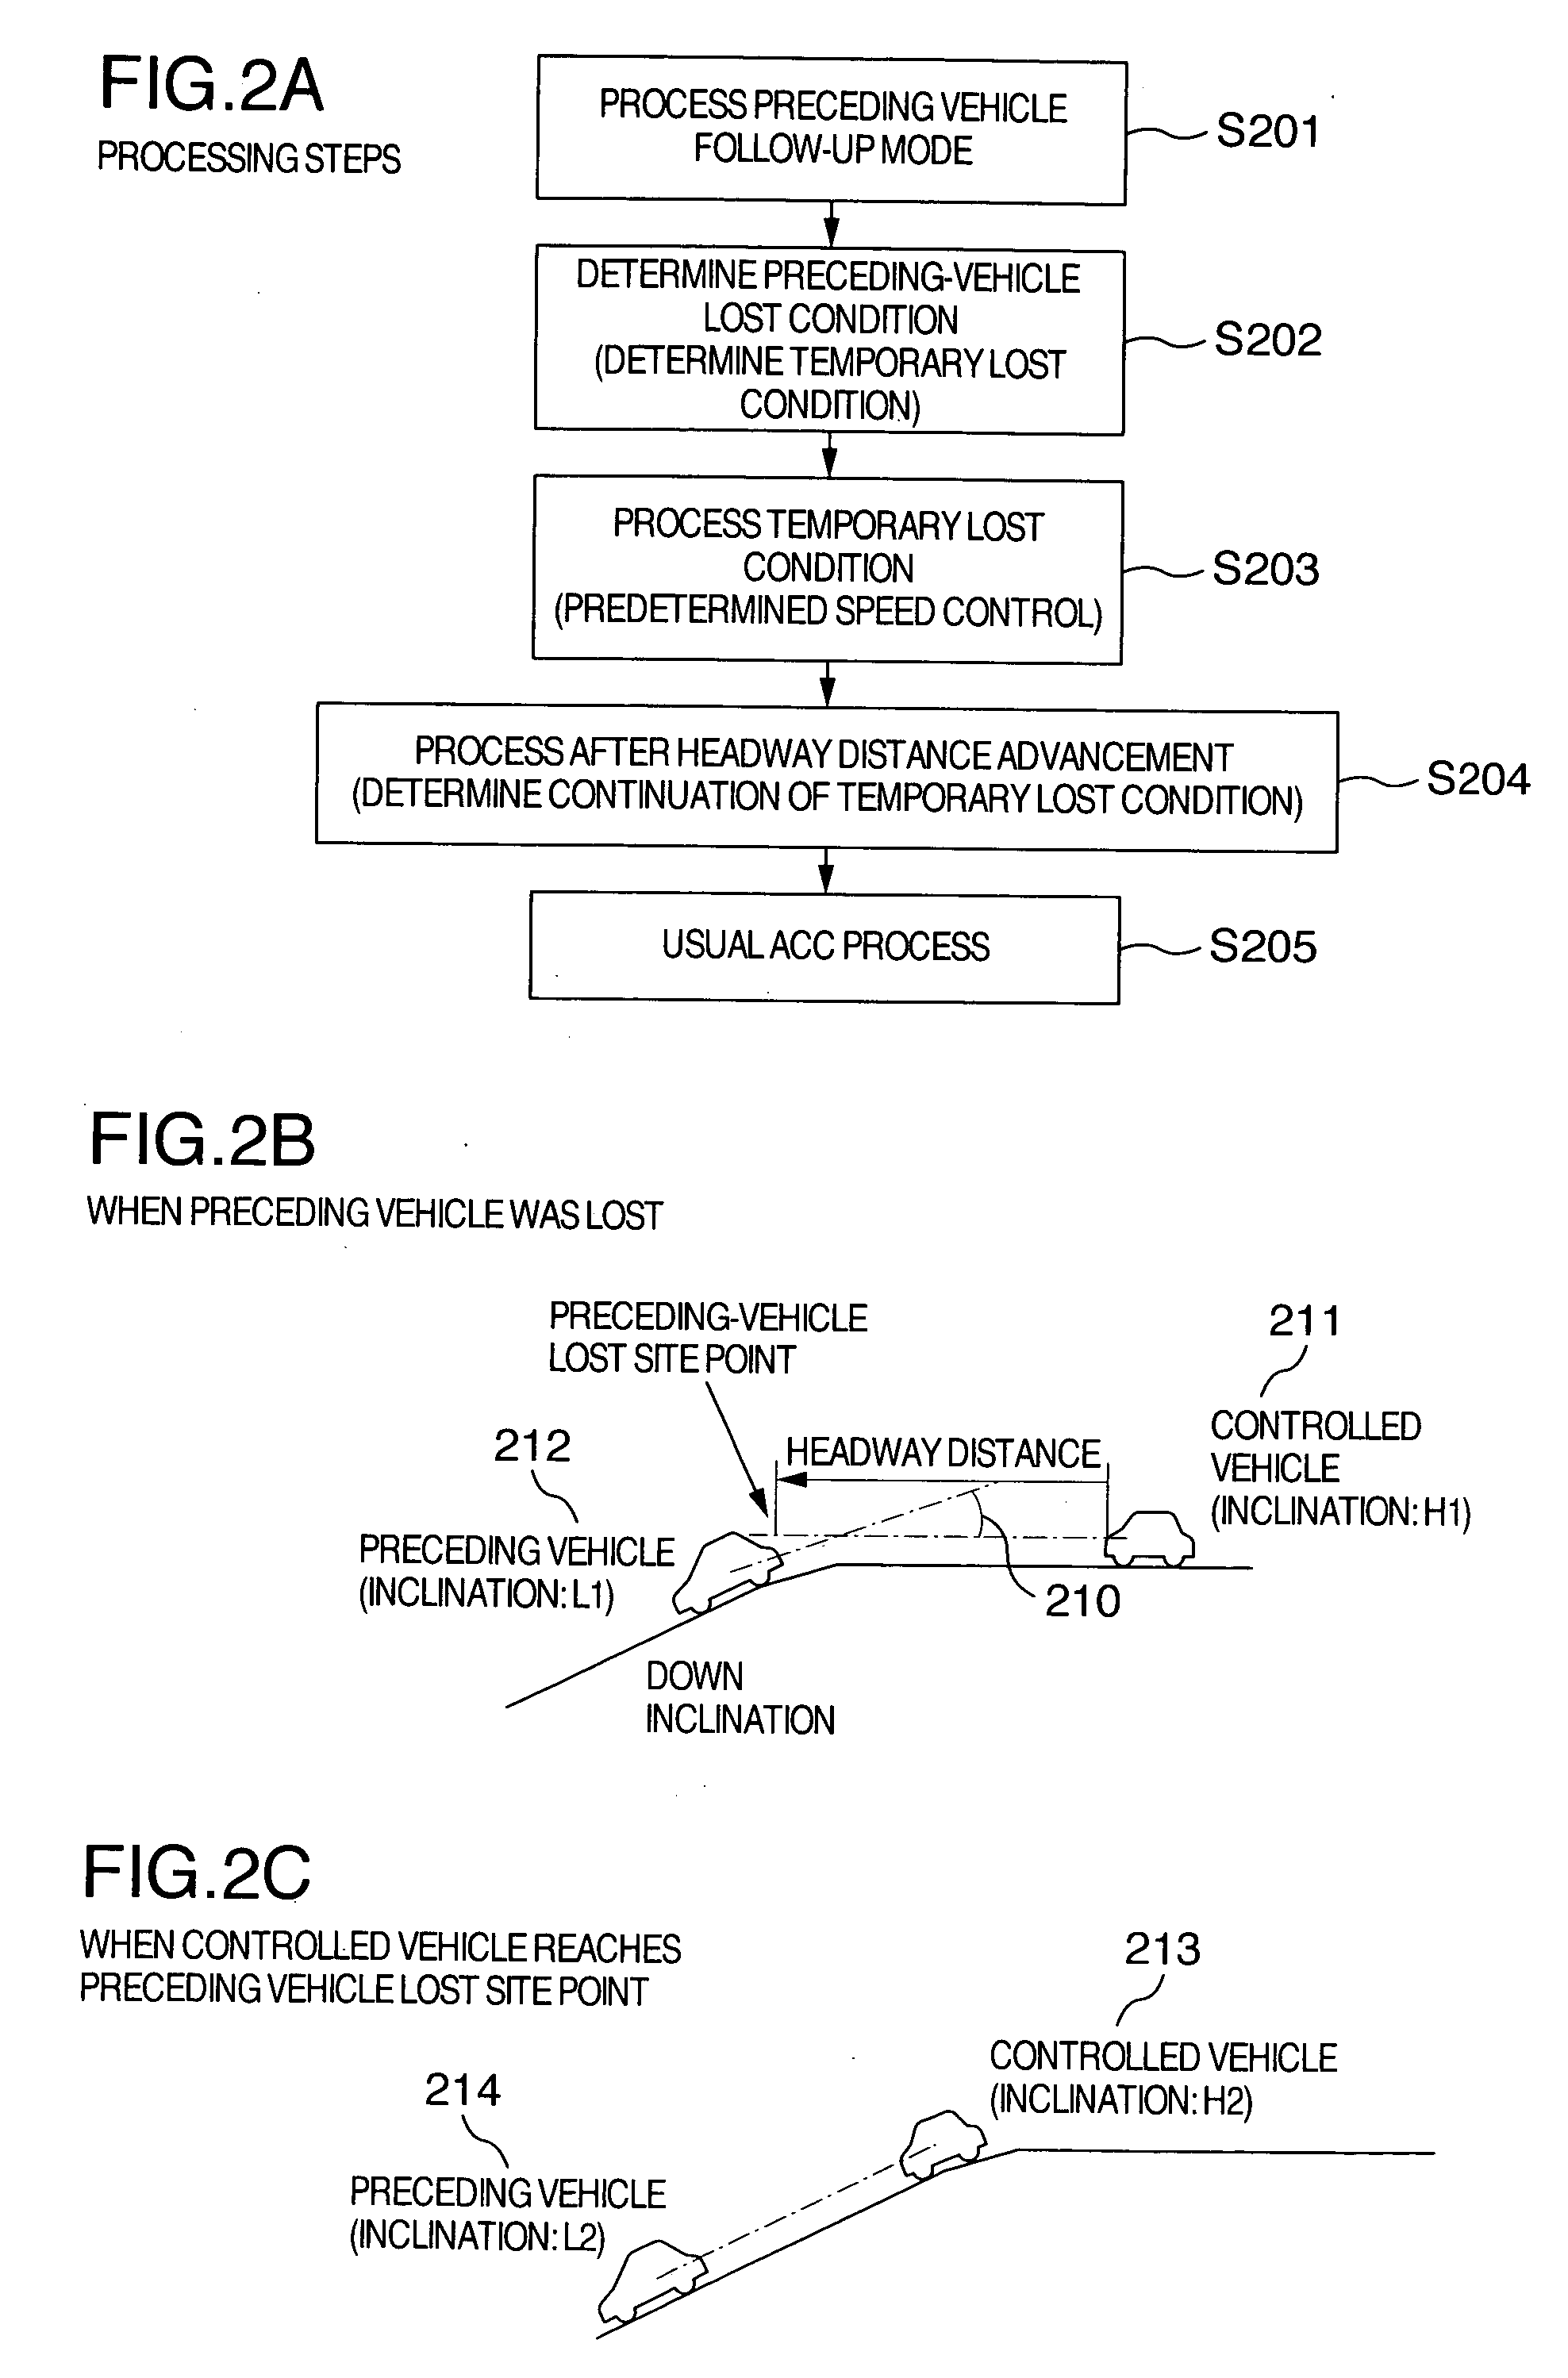 Adaptive cruise control system and navigation system's media with vehicle control information included